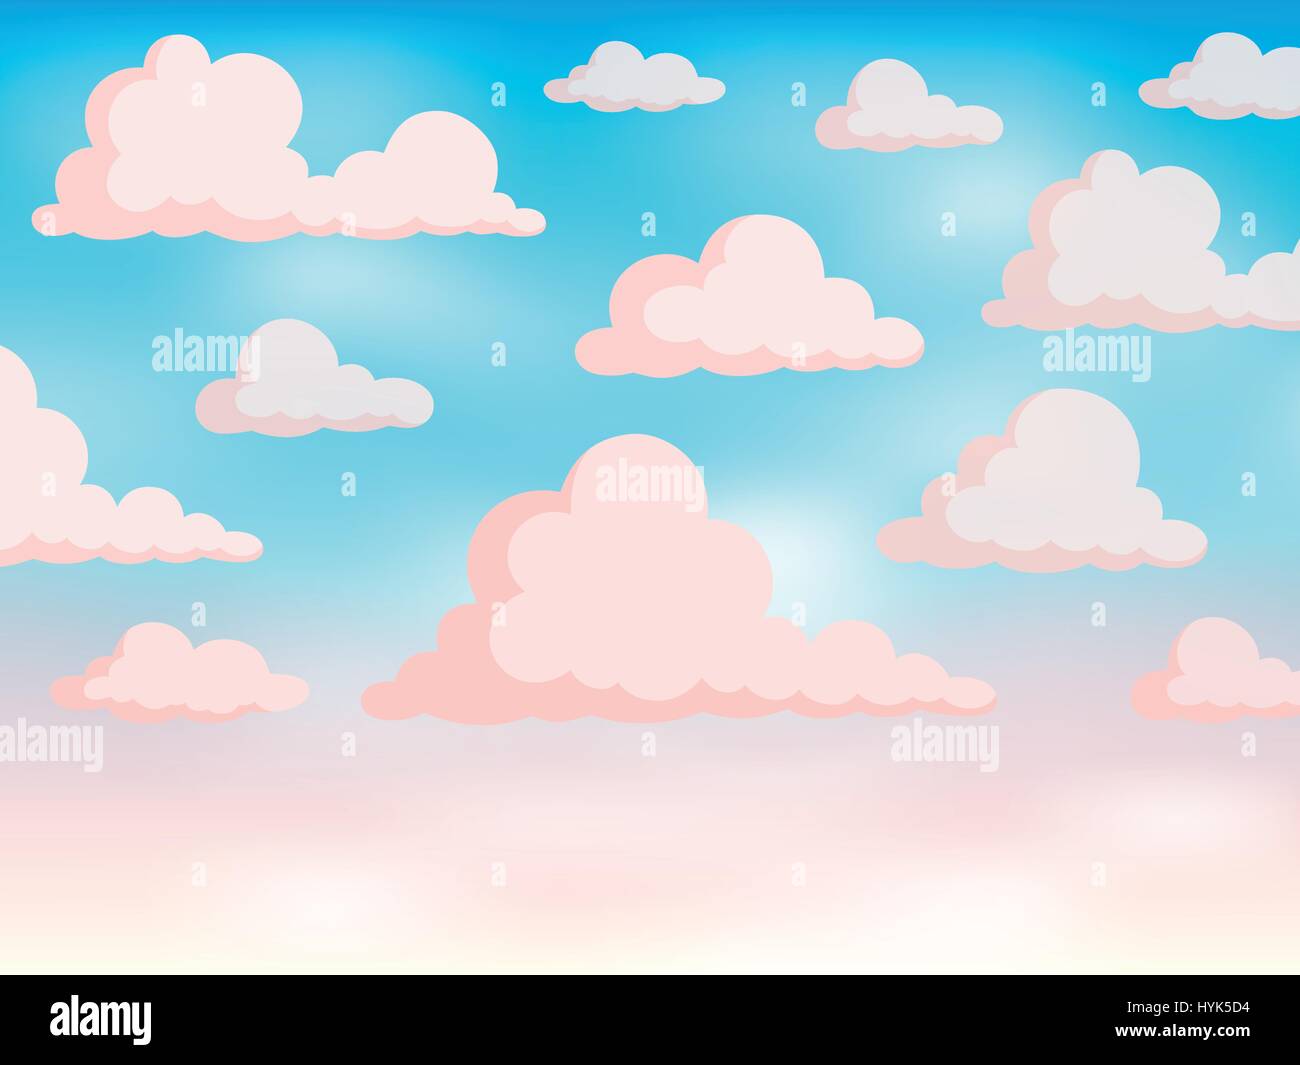 Pink sky theme background 2 - eps10 vector illustration. Stock Vector